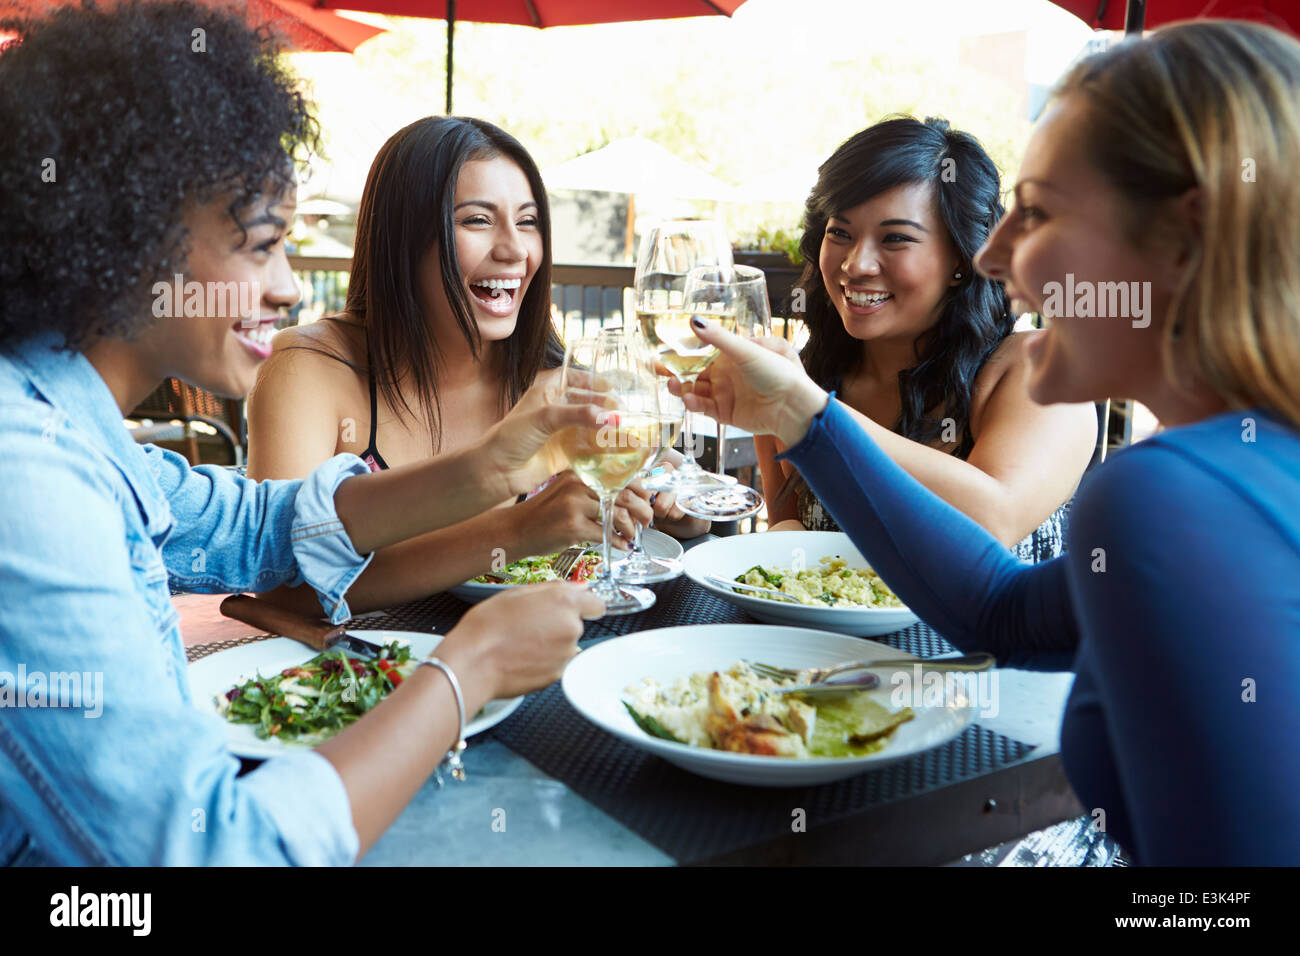 Group Of Female Friends Enjoying Meal At Outdoor Restaurant Stock Photo